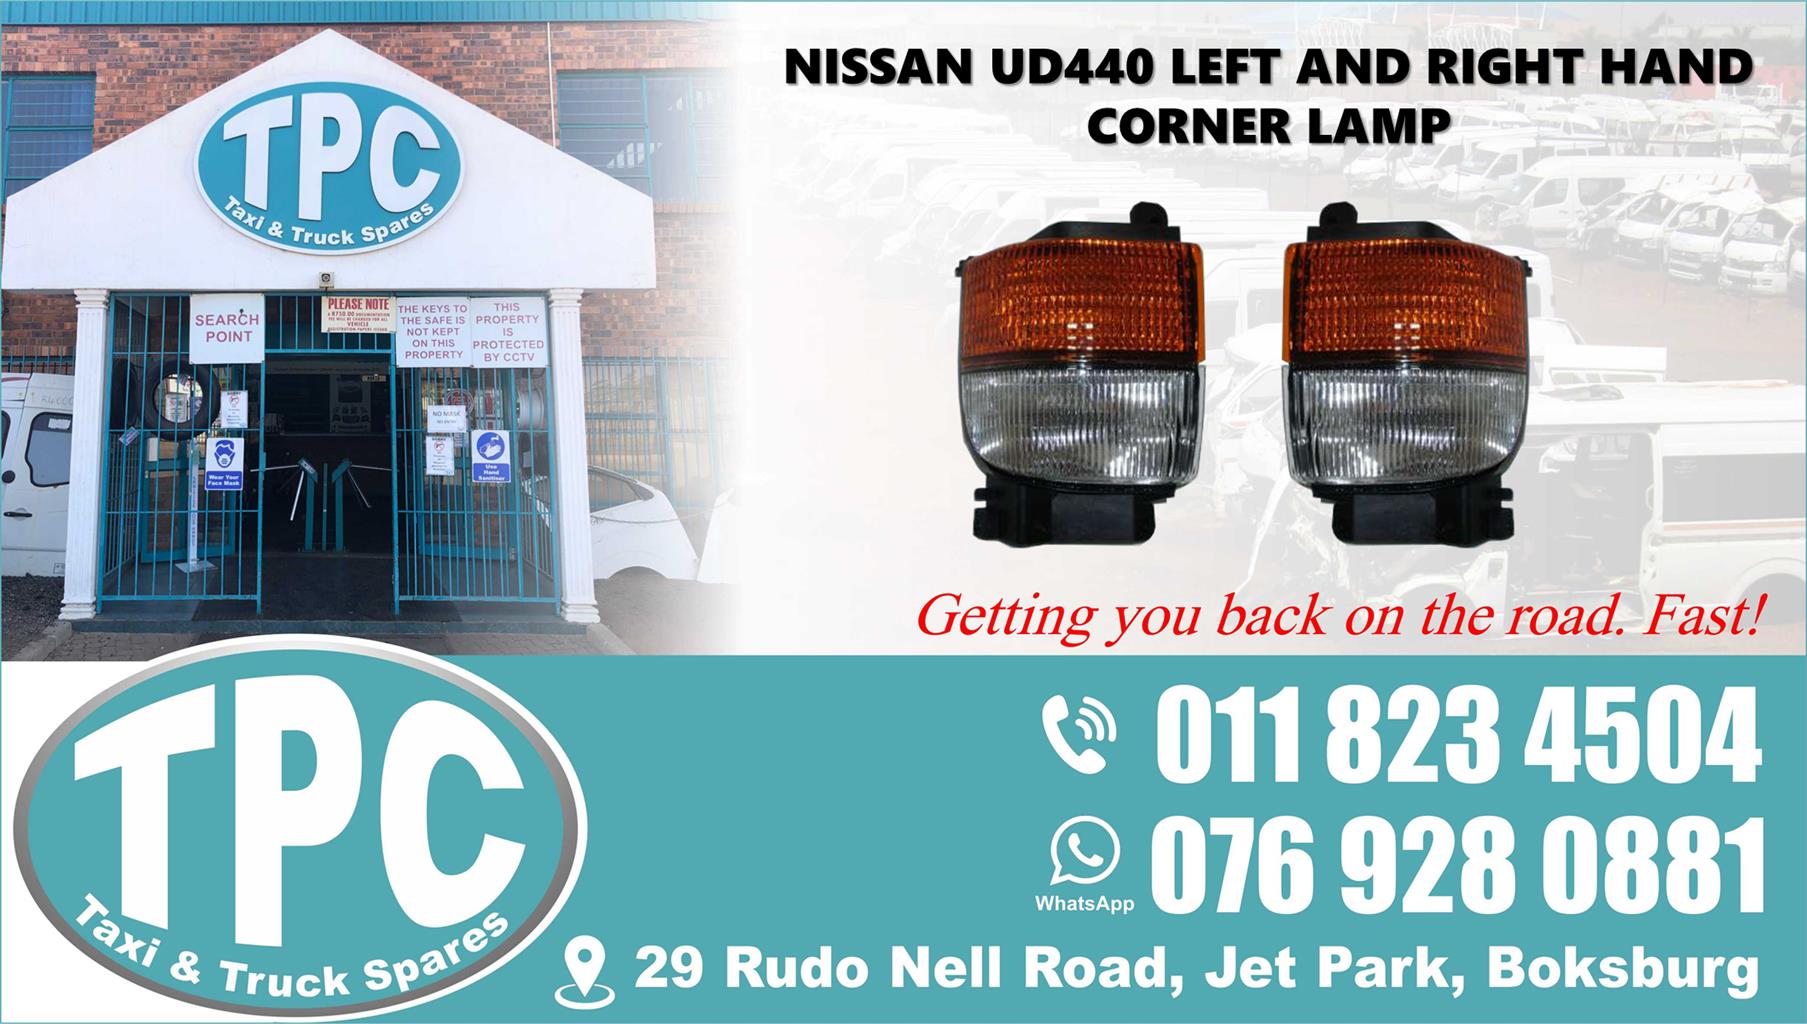 Nissan UD440 Left and Right Hand Corner Lamp